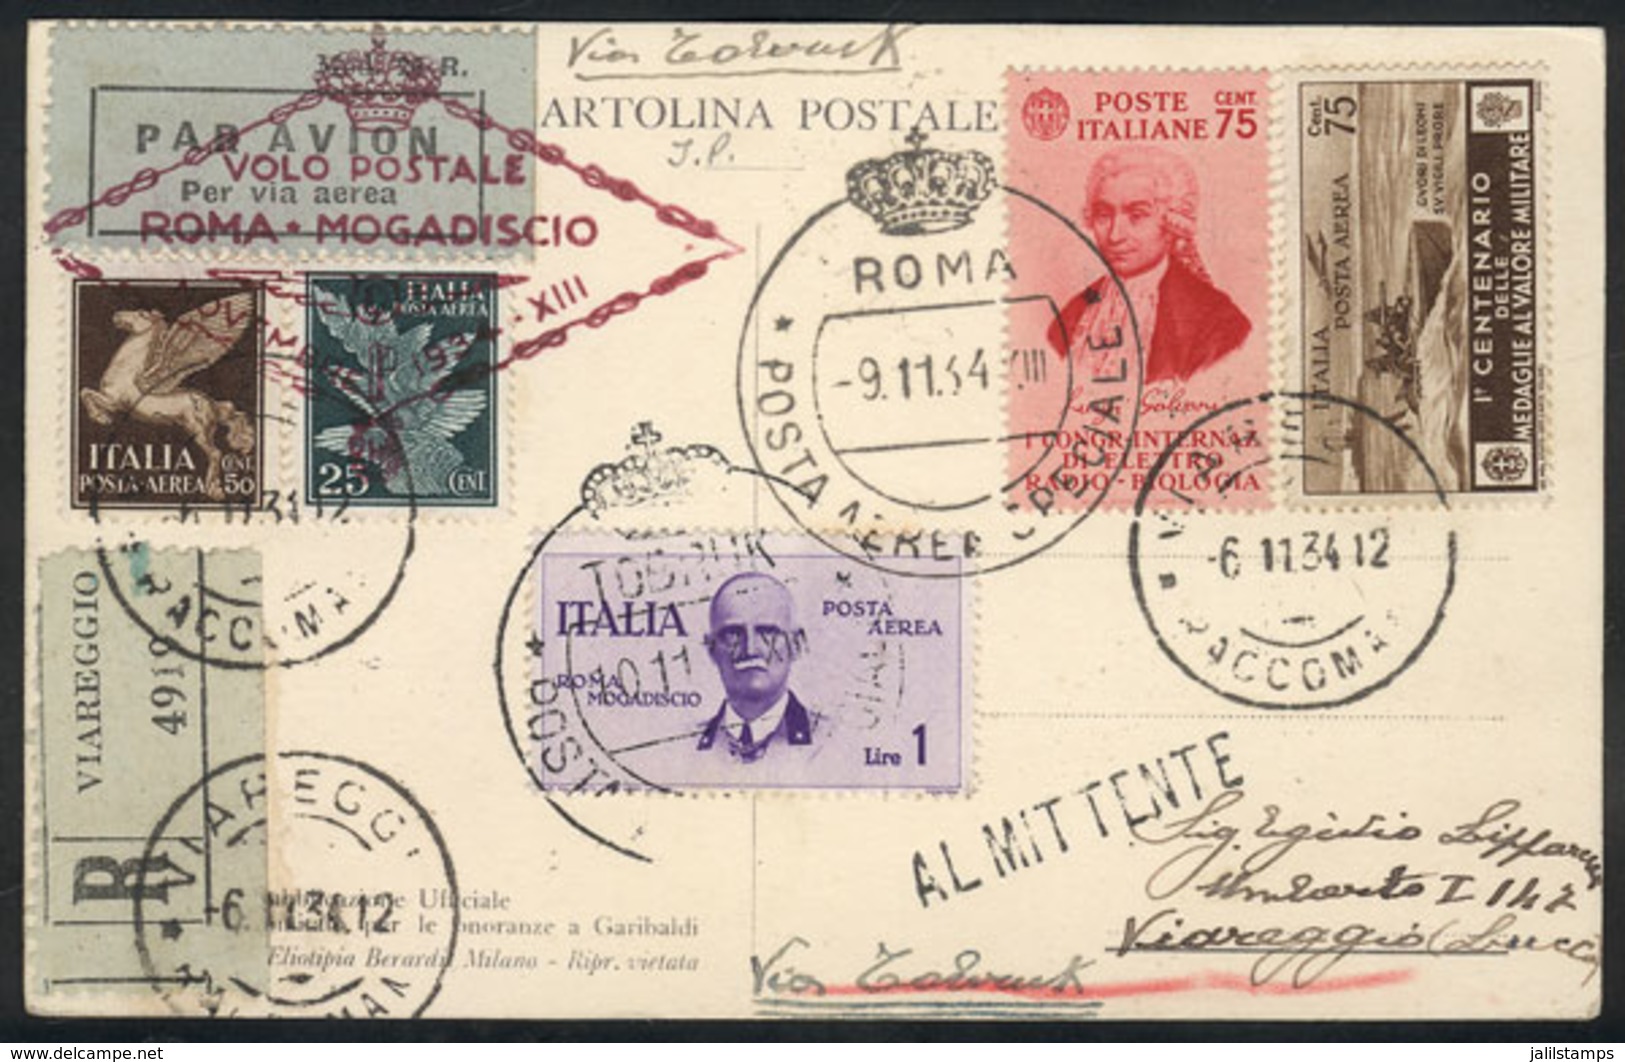 722 ITALY: 9/NO/1934 Roma - Tobruk: First Airmail By Ala-Littoria, Postcard With Special Handstamp And Arrival Mark, Exc - Unclassified